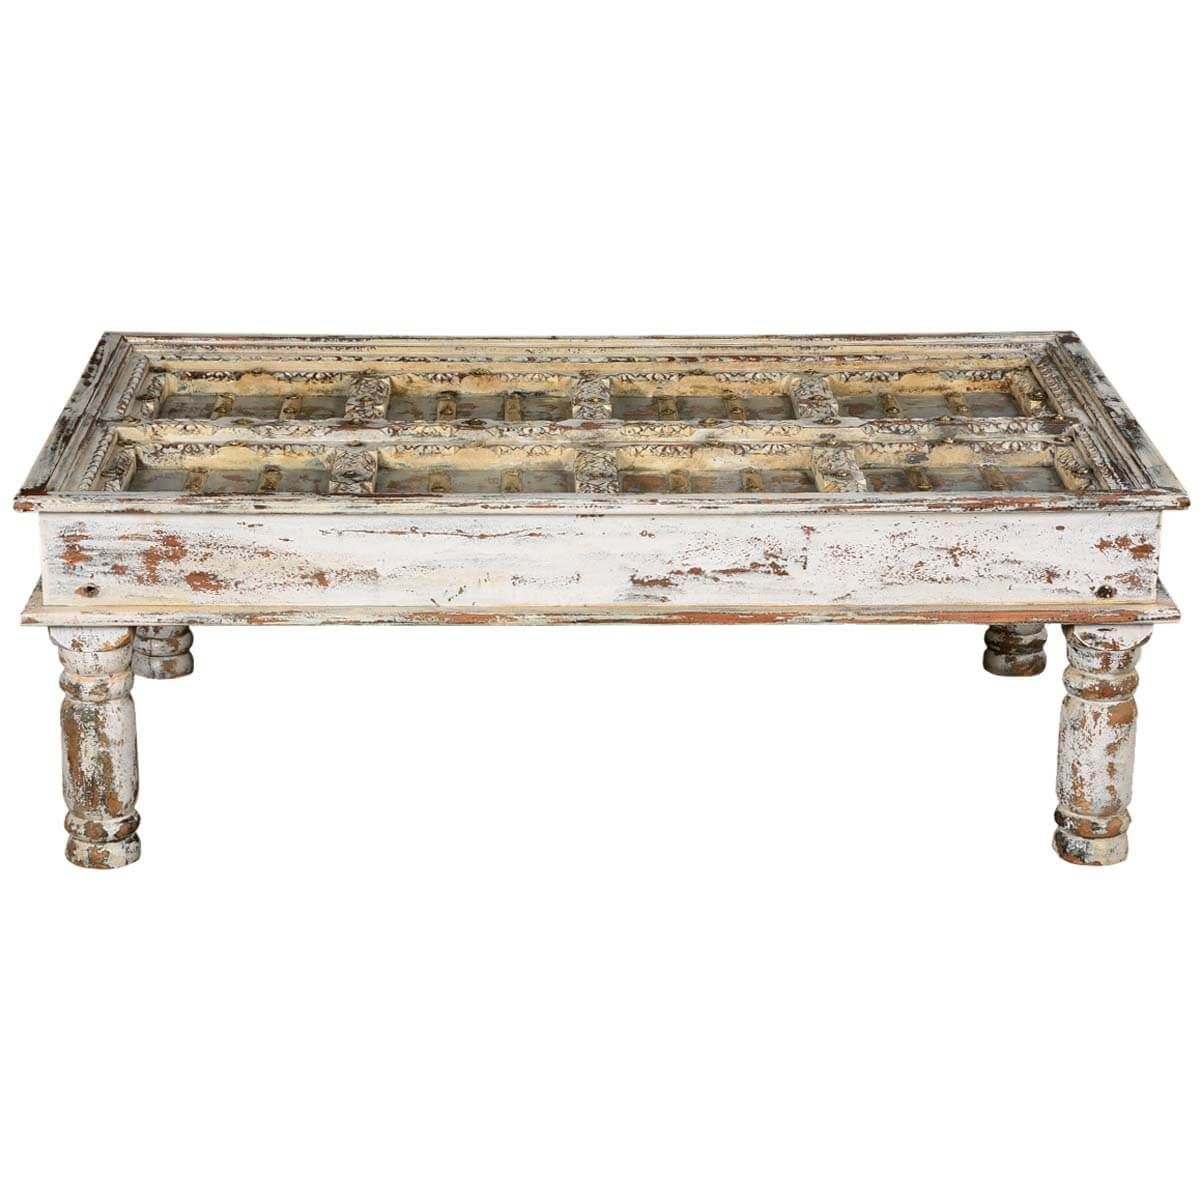 Winter White Distressed Mango Wood Coffee Table With Regard To Square Weathered White Wood Coffee Tables (View 8 of 15)